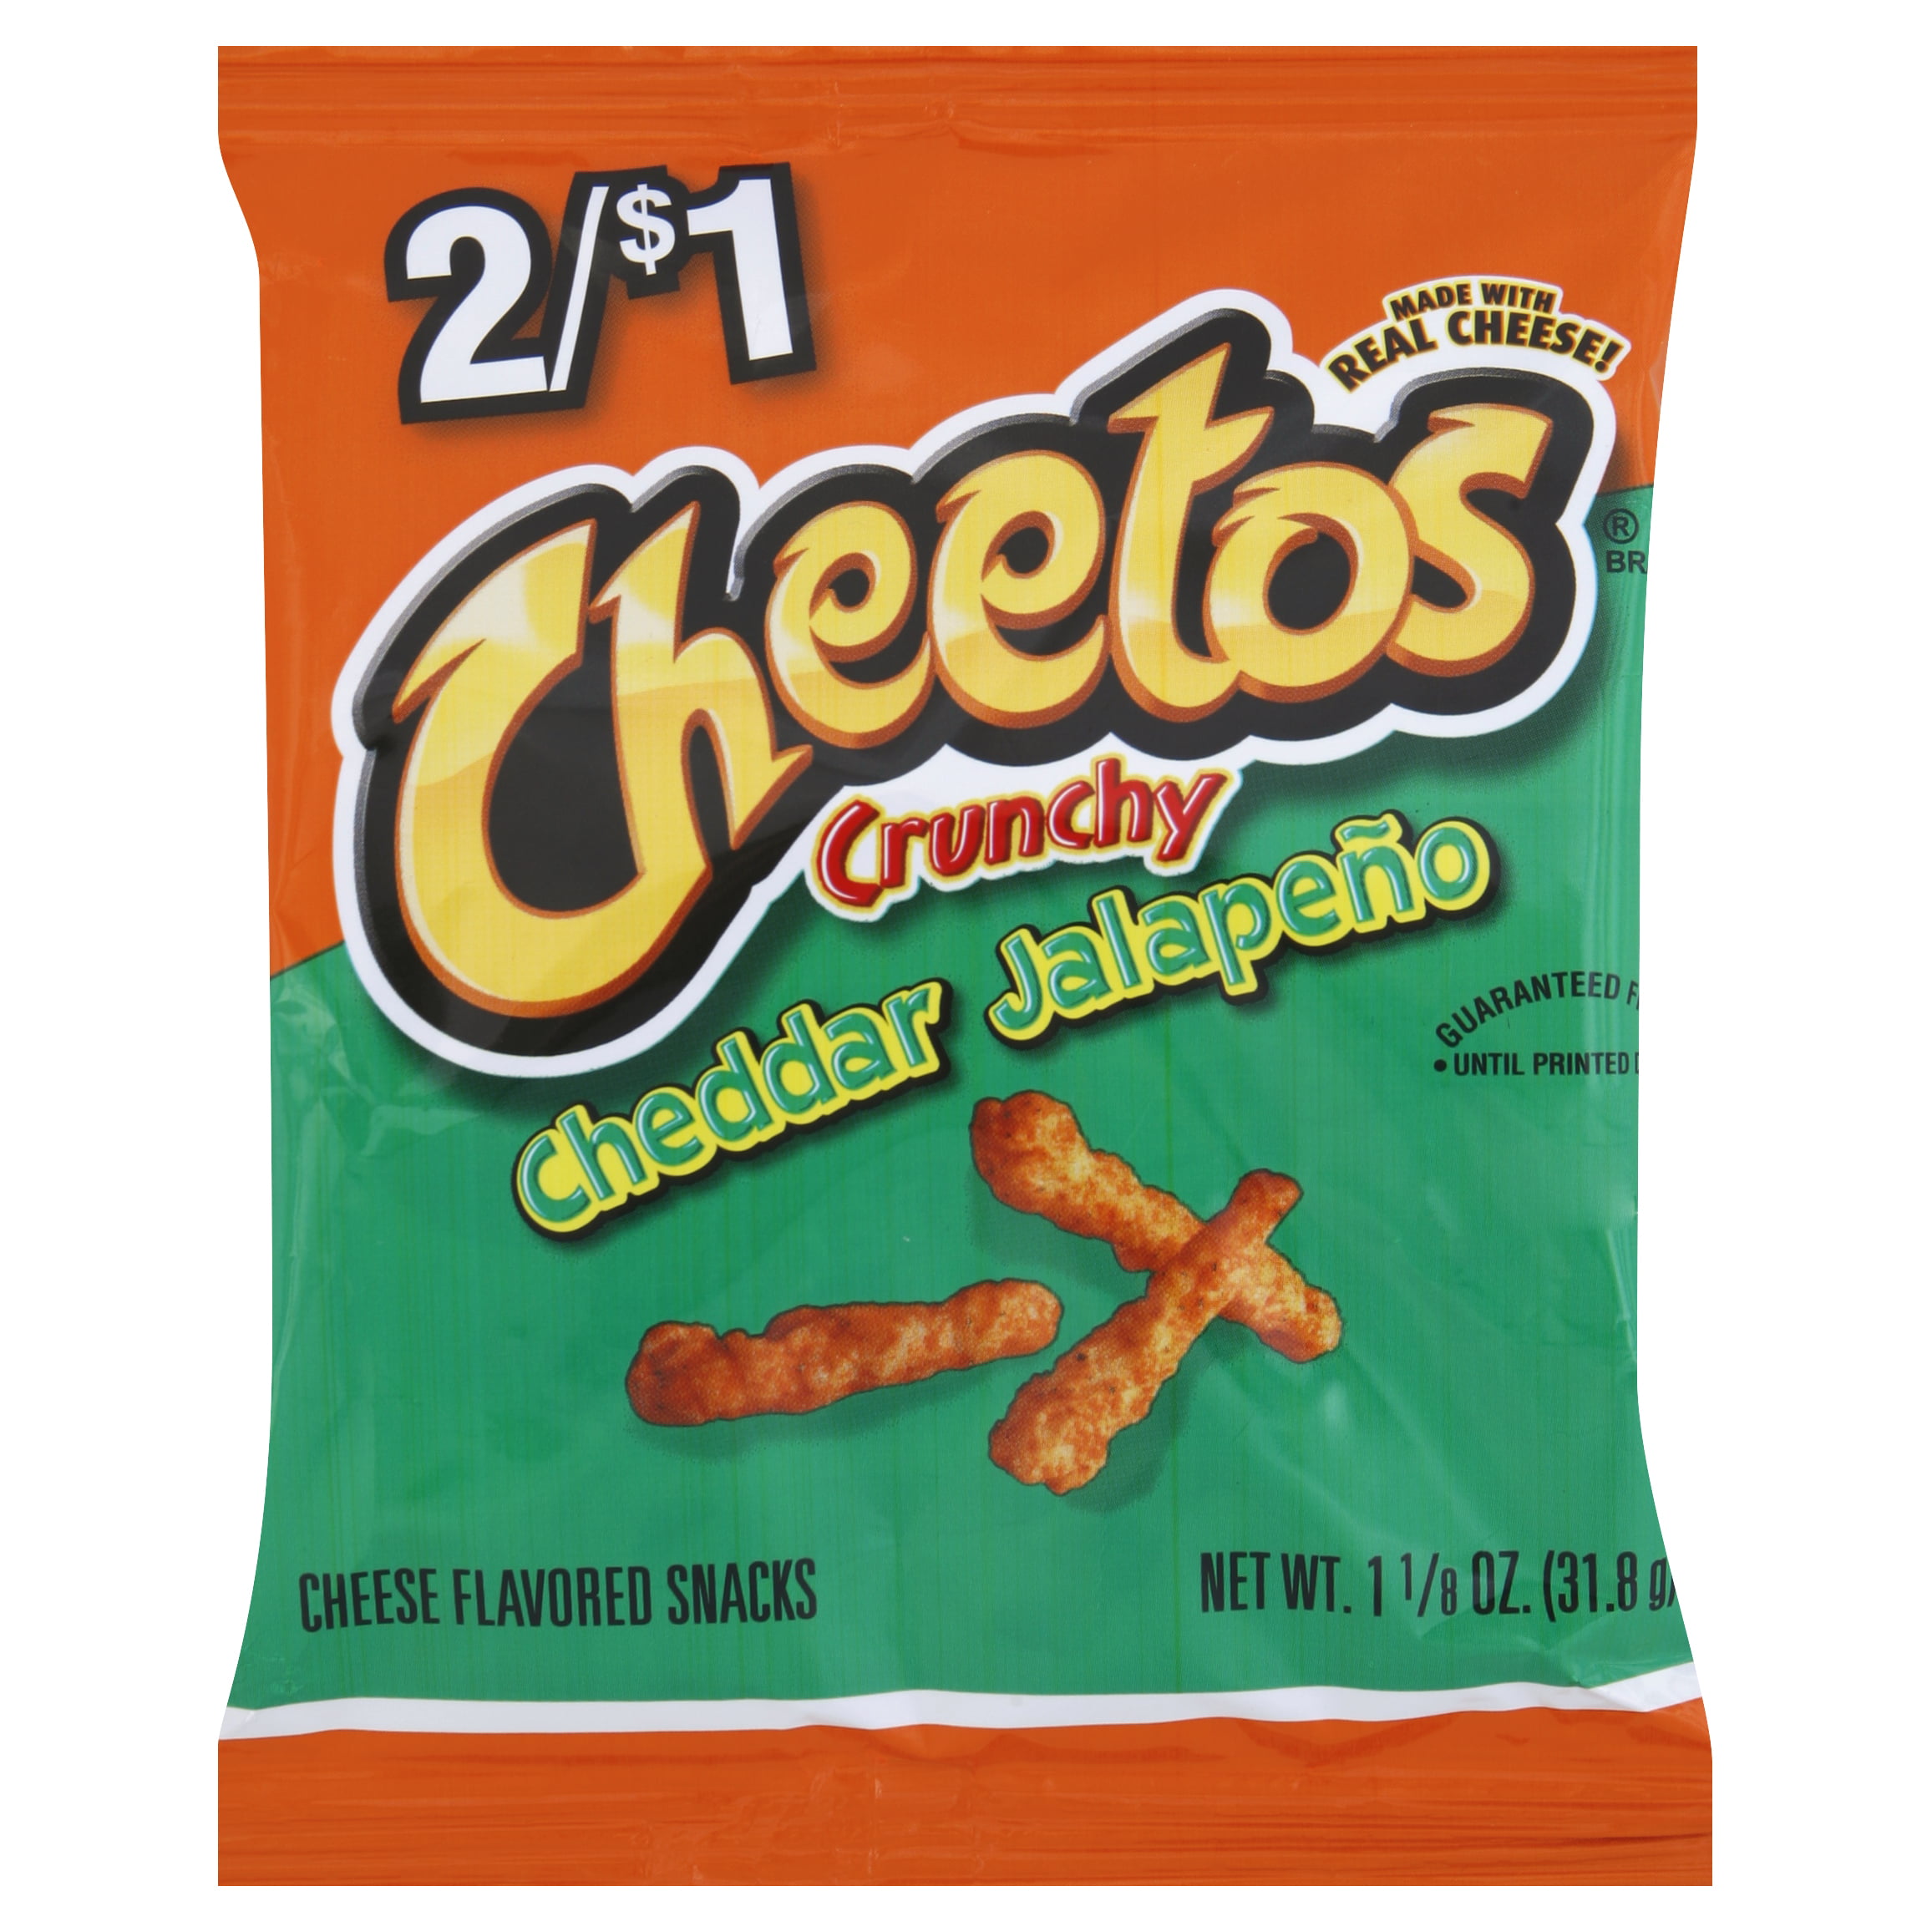 Cheetos Cheddar Jalapeño Crunchy Cheese Flavored Party Snacks Net Wt 8.5 Oz  (pack of 6)